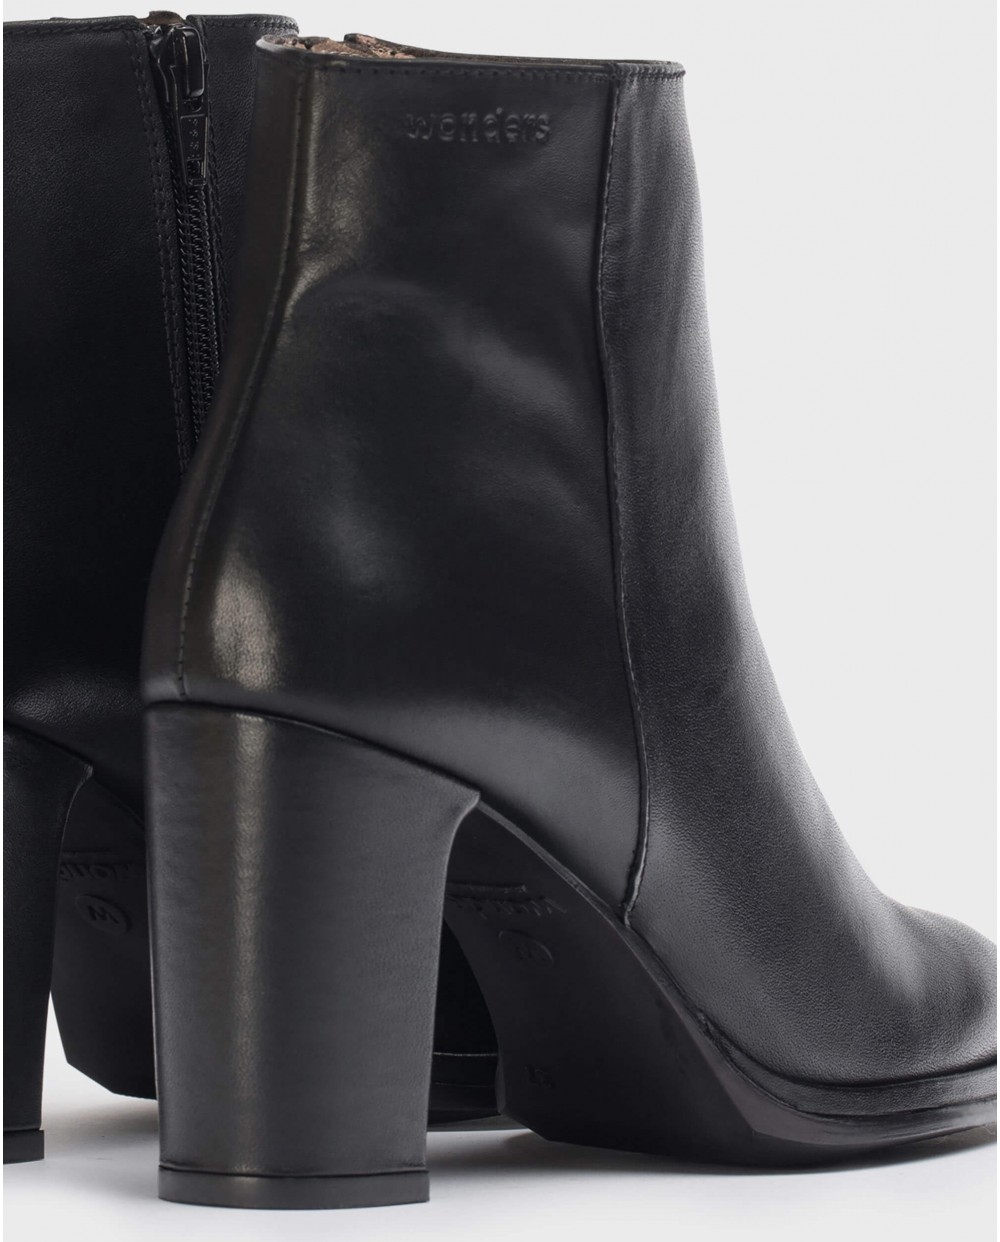 Wonders-Ankle Boots-Black Ostro Ankle boot